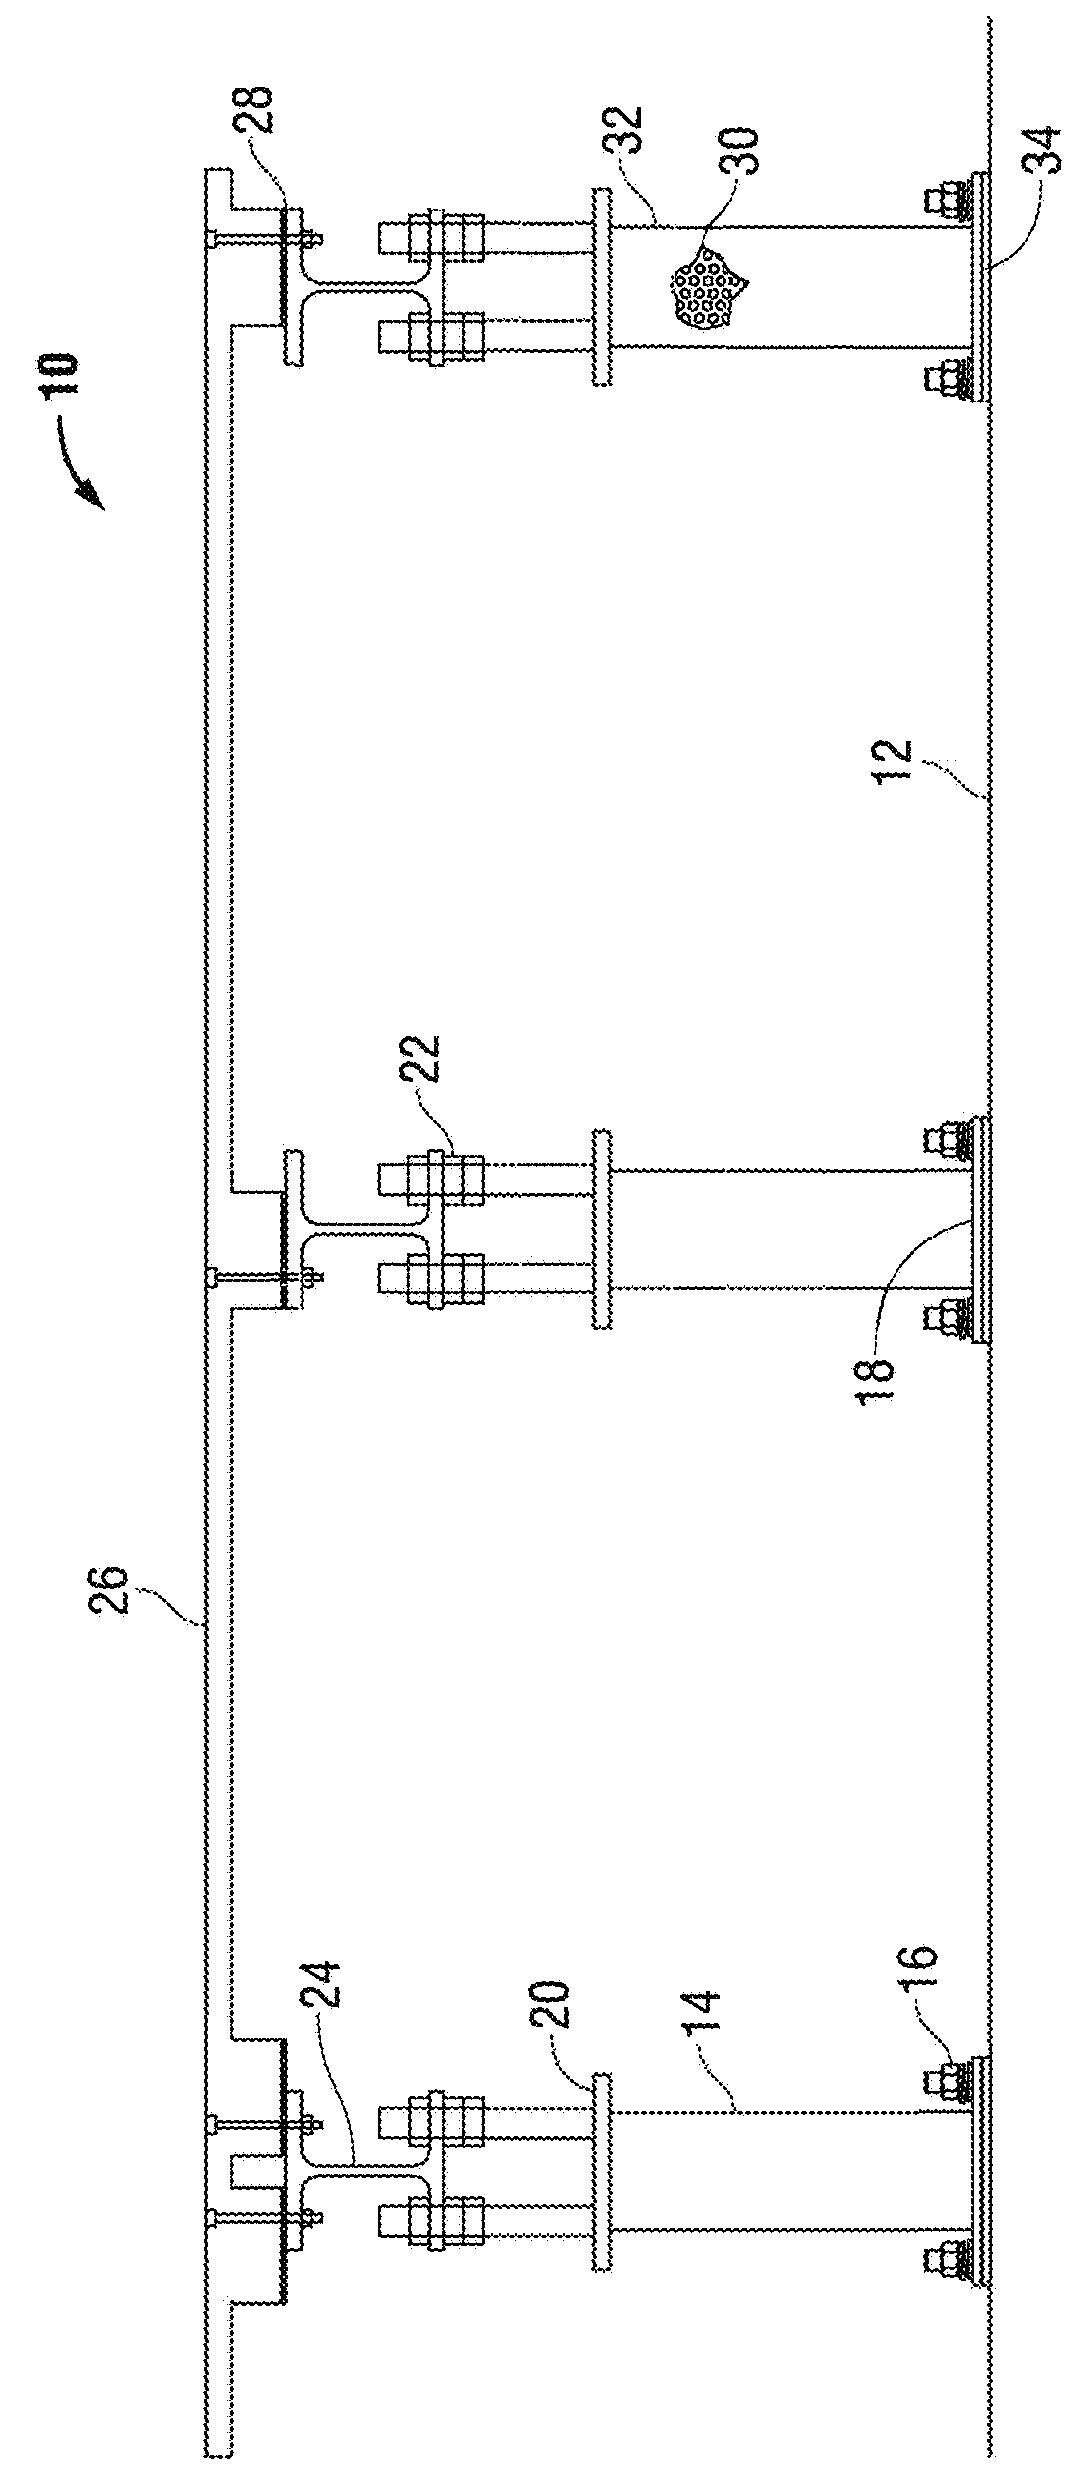 Method and system for improved semiconductor processing equipment vibration isolation and reduction